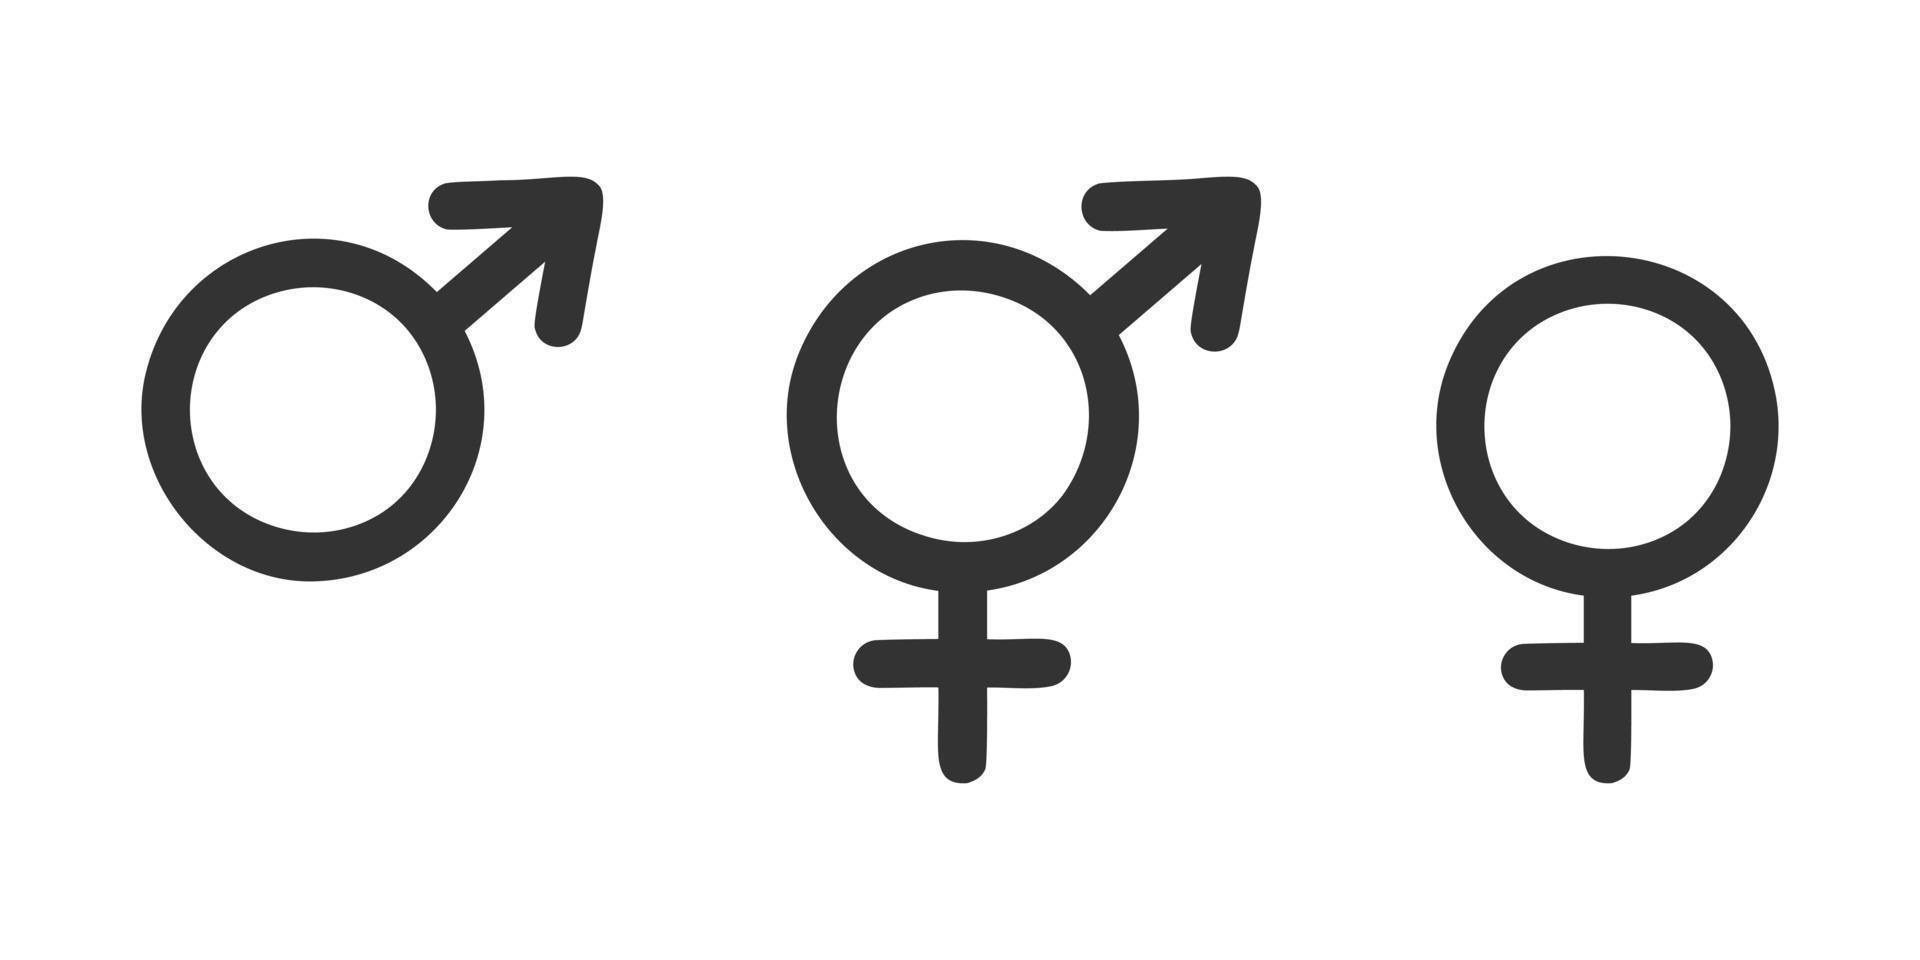 Male, female and transgender signs. Public restroom icons vector